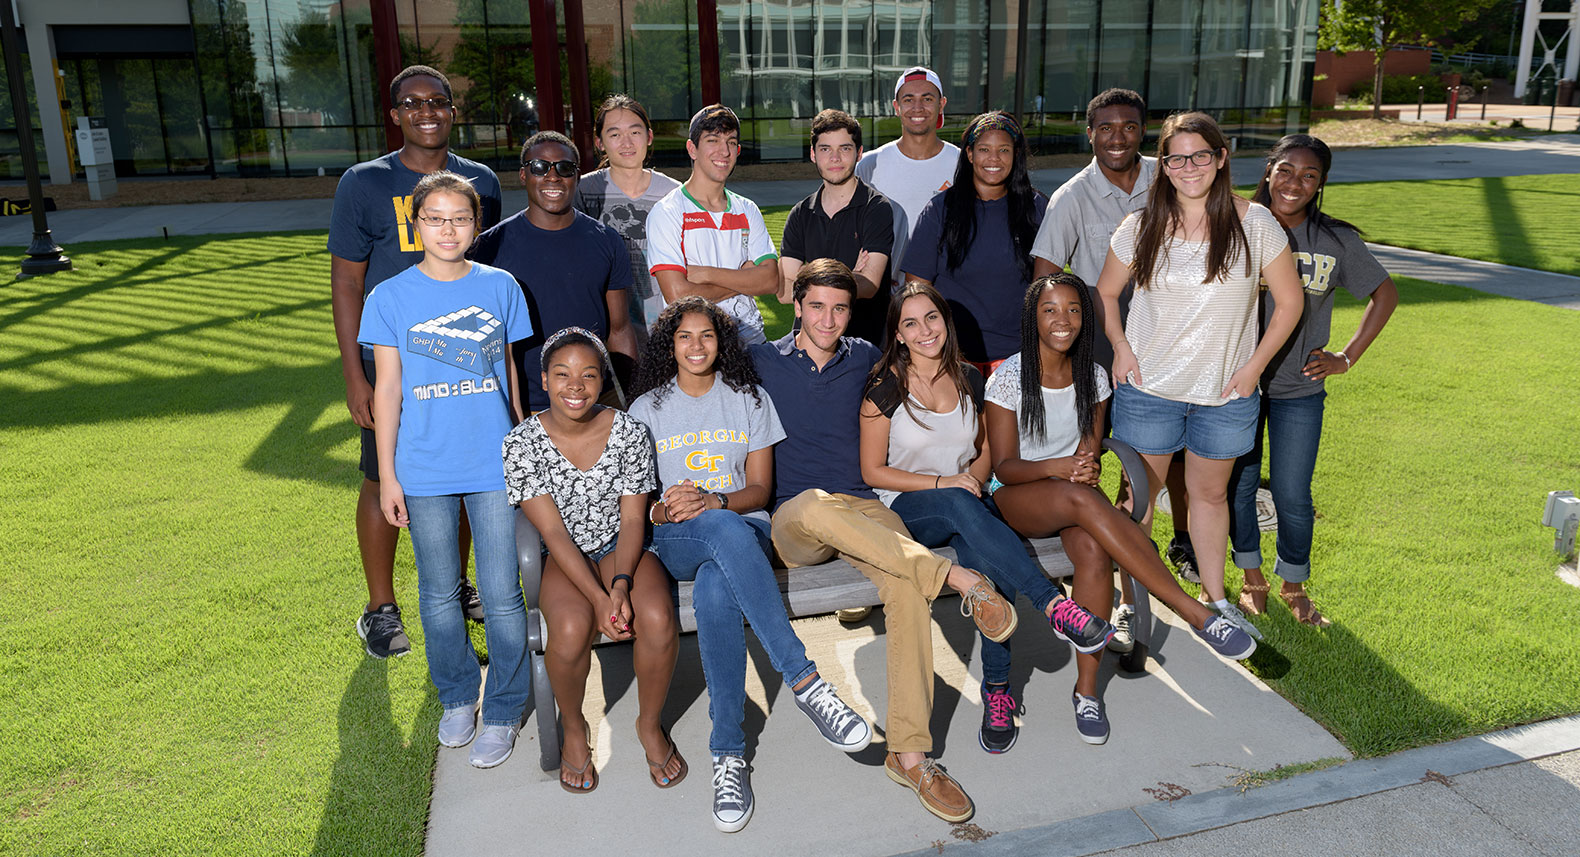 Diverse Georgia Tech students pose together